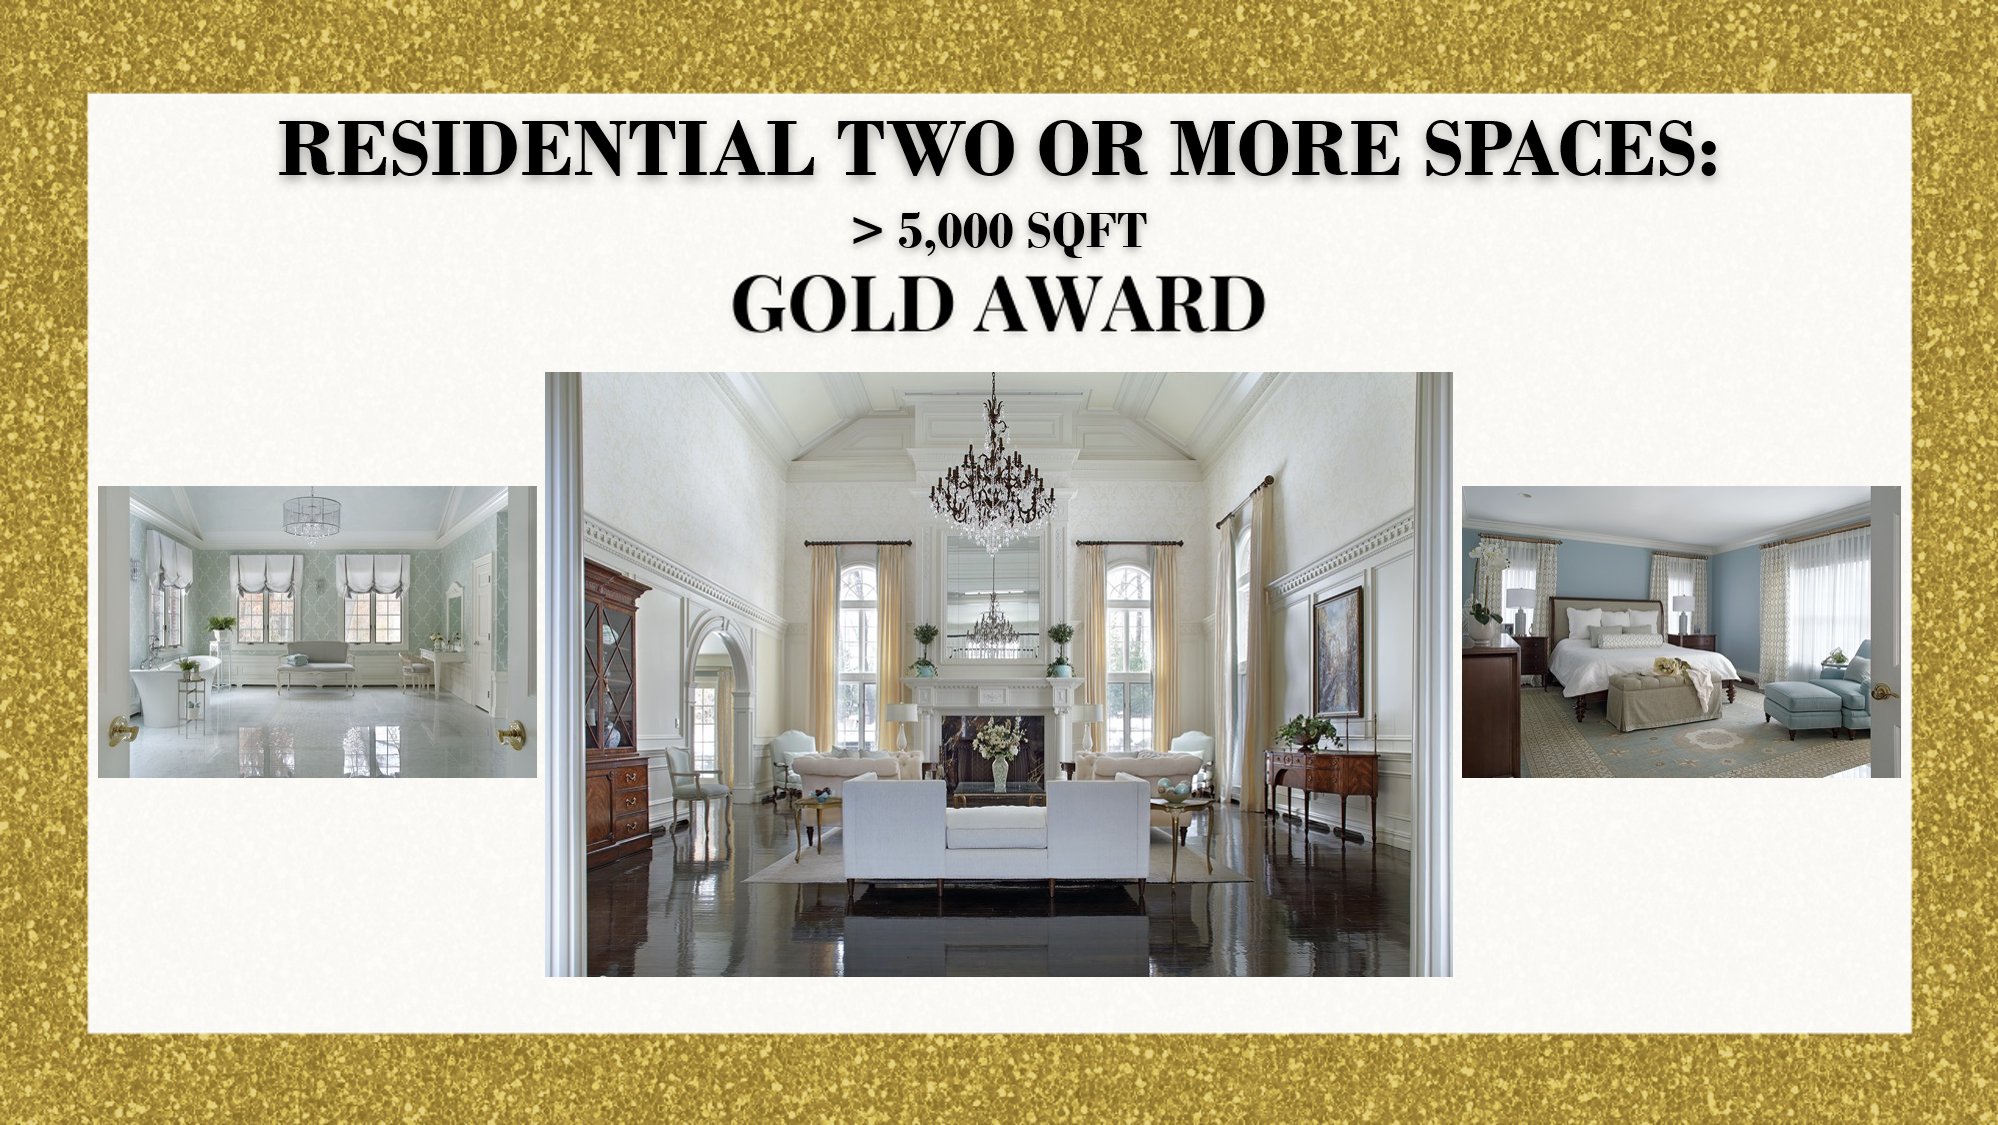 Gold Award Residential Two or More Spaces > 5,000 Square Foot